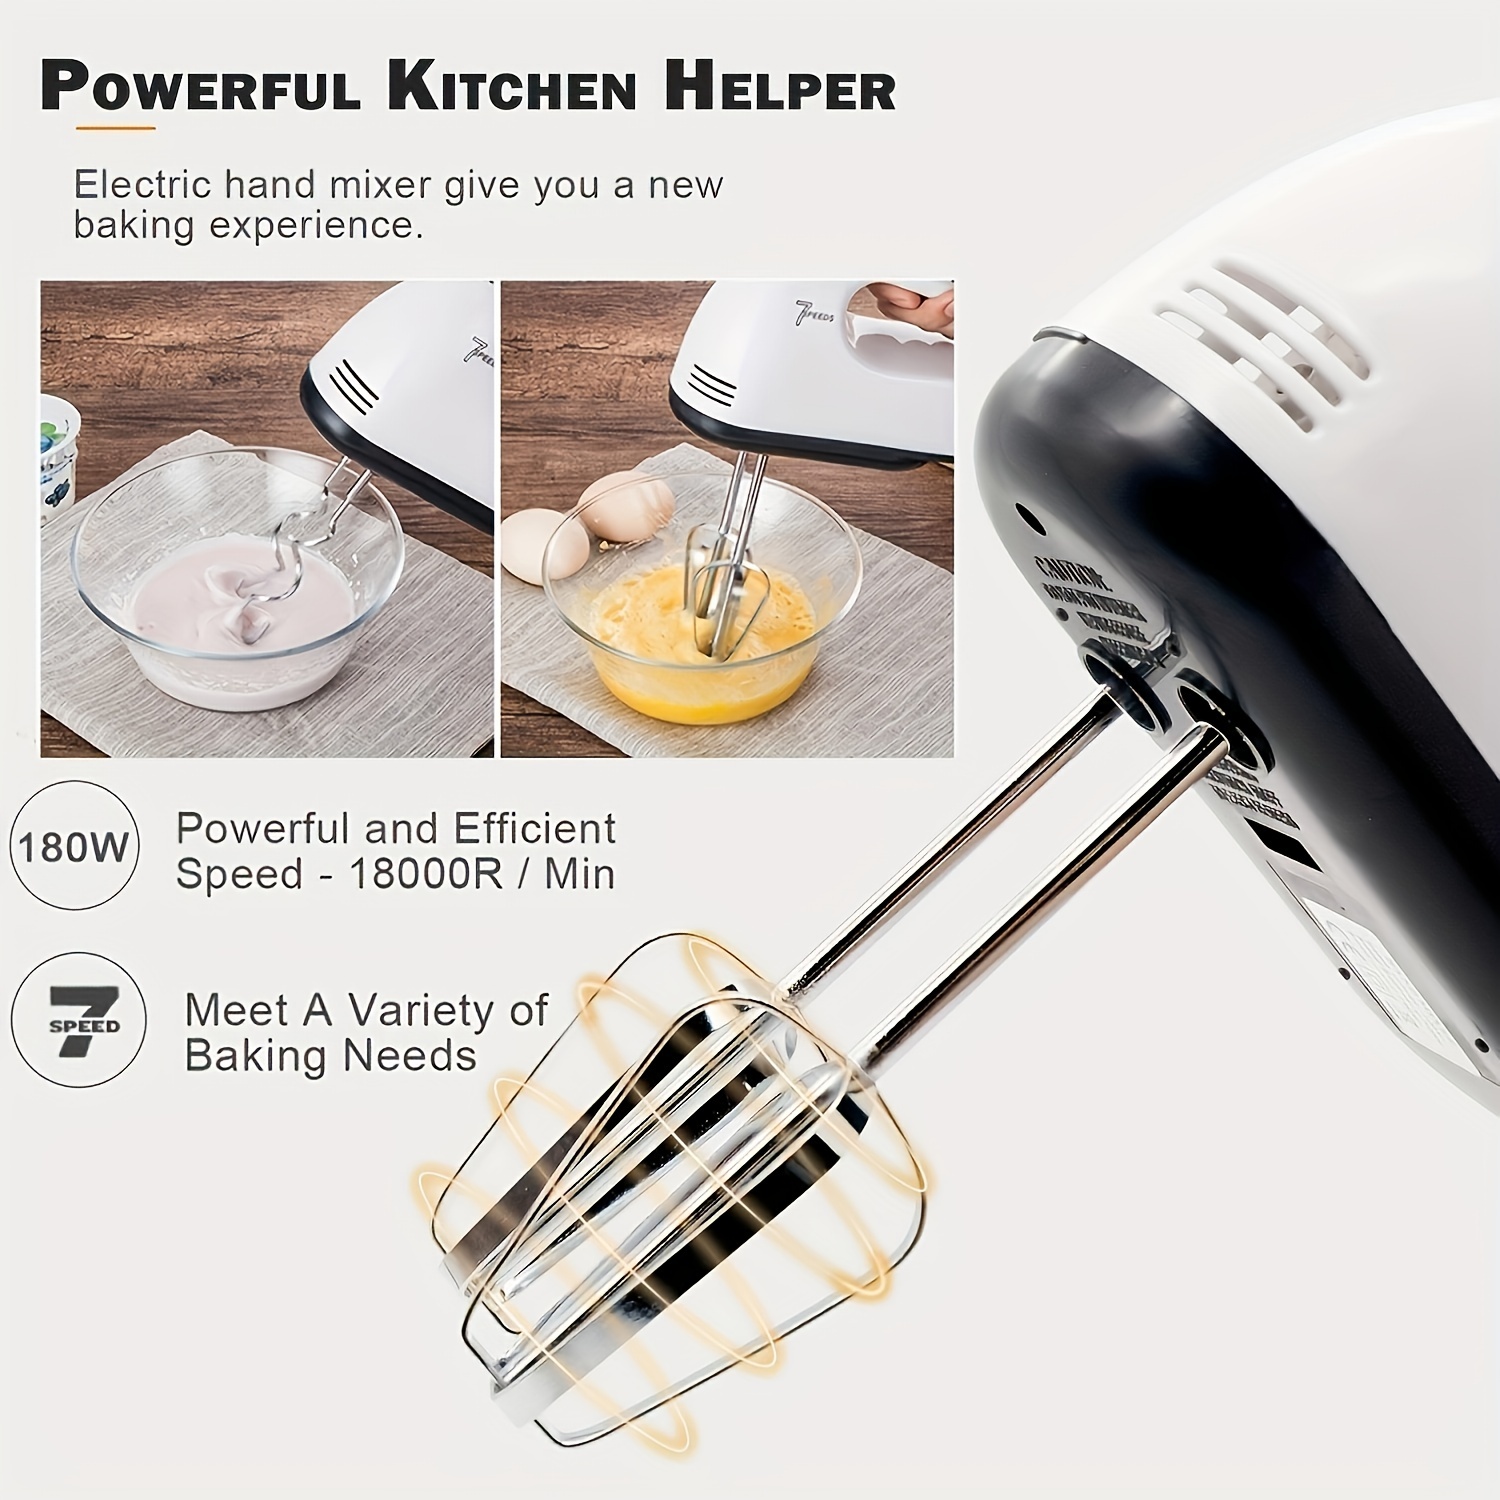 Egg Tools Handheld Whisk Electric Home Small Baking Cake Mixer